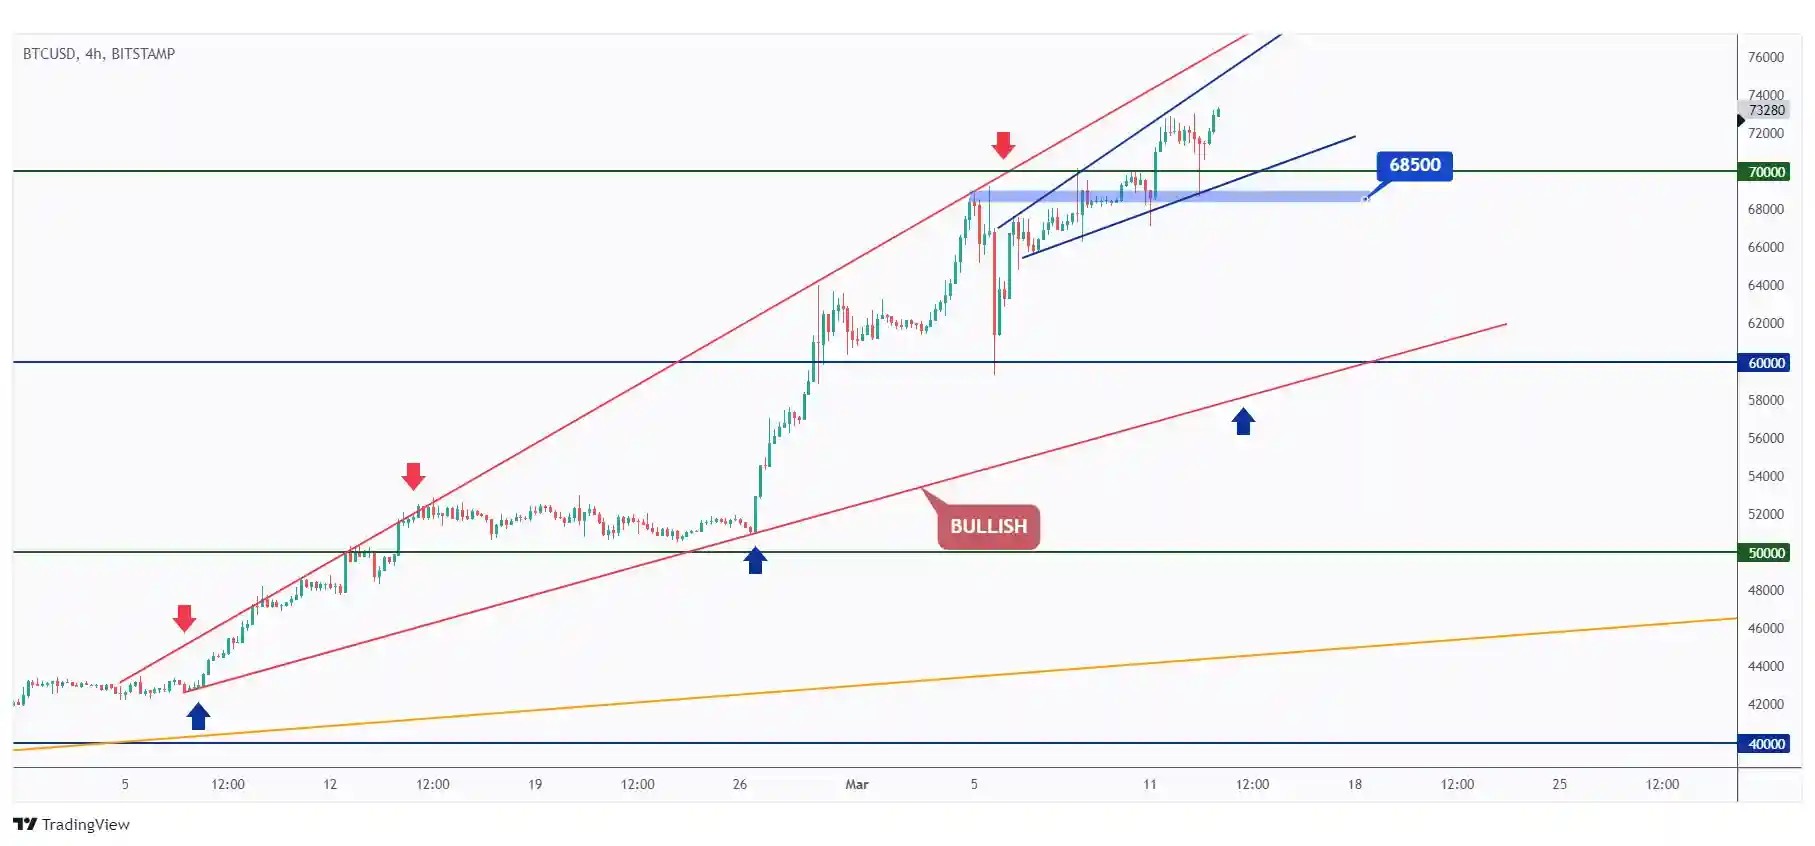 BTC 4h chart overall bullish medium-term trading within the rising channel as long as the $68,500 low holds.